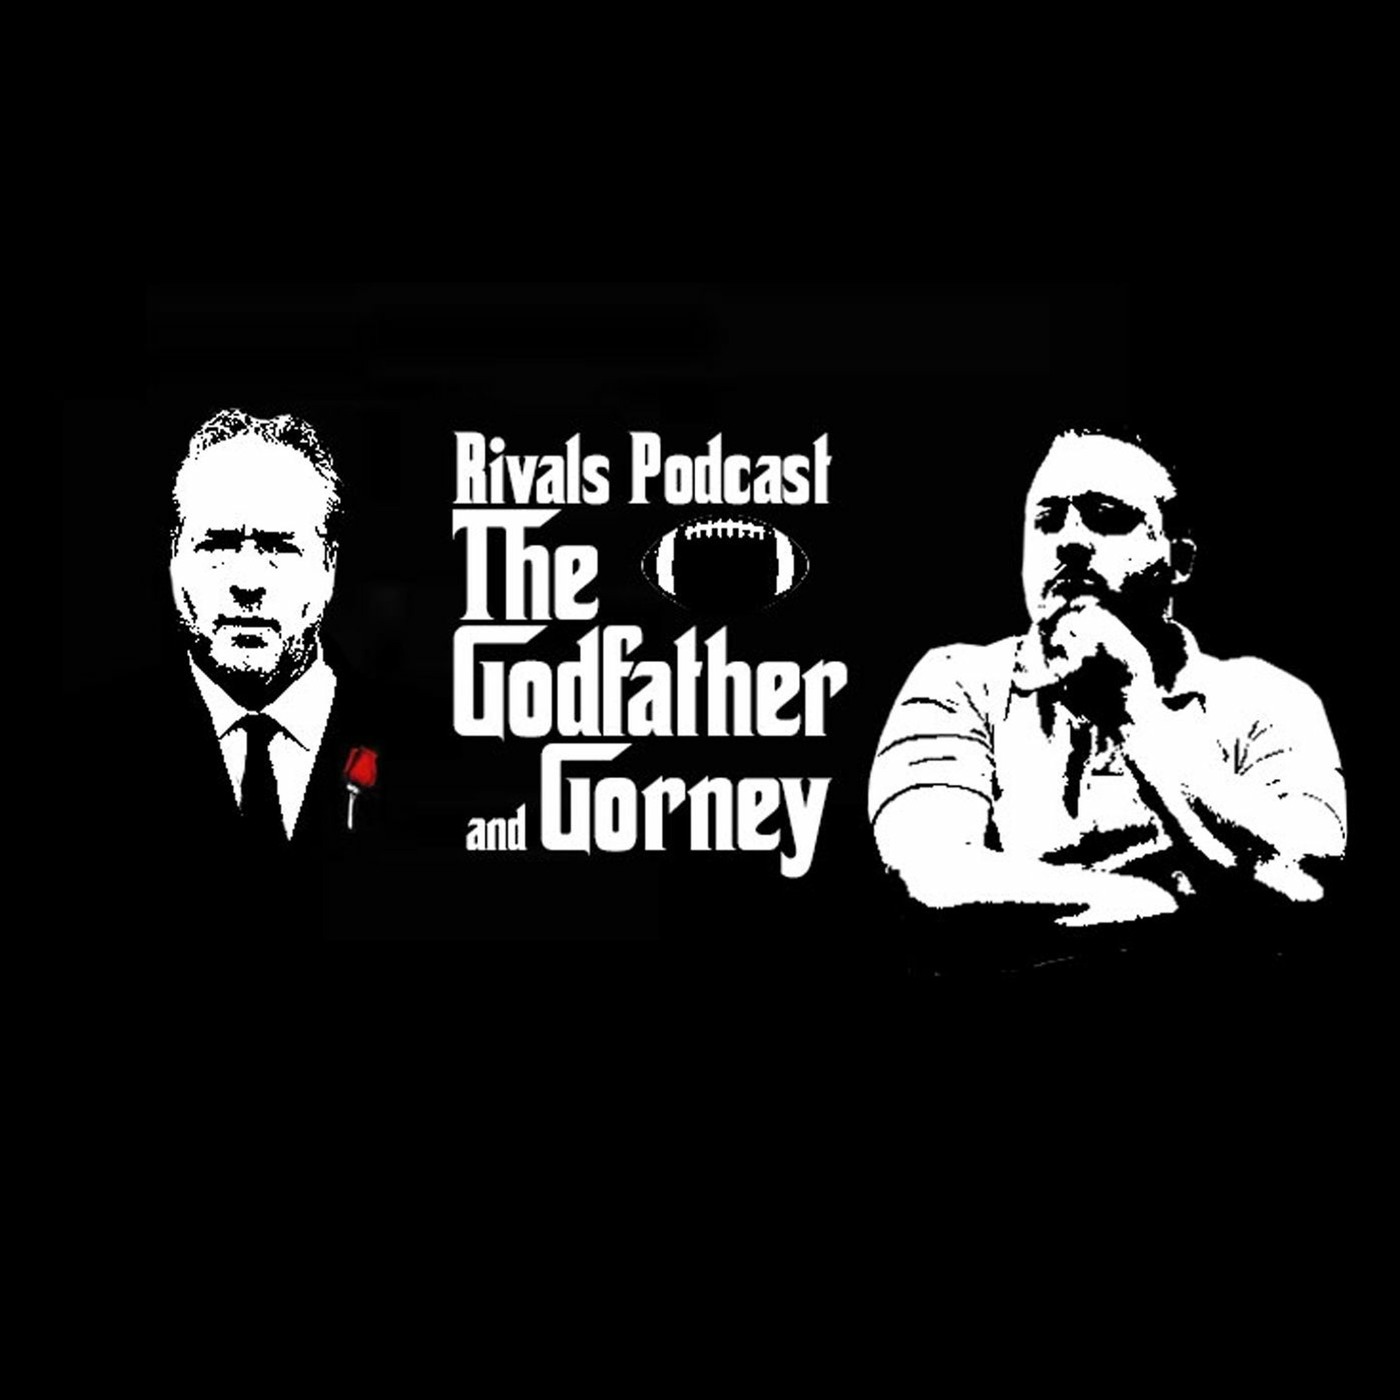 Godfather & Gorney - The New Year's Six bowls, CFB Playoffs and Heisman finalists